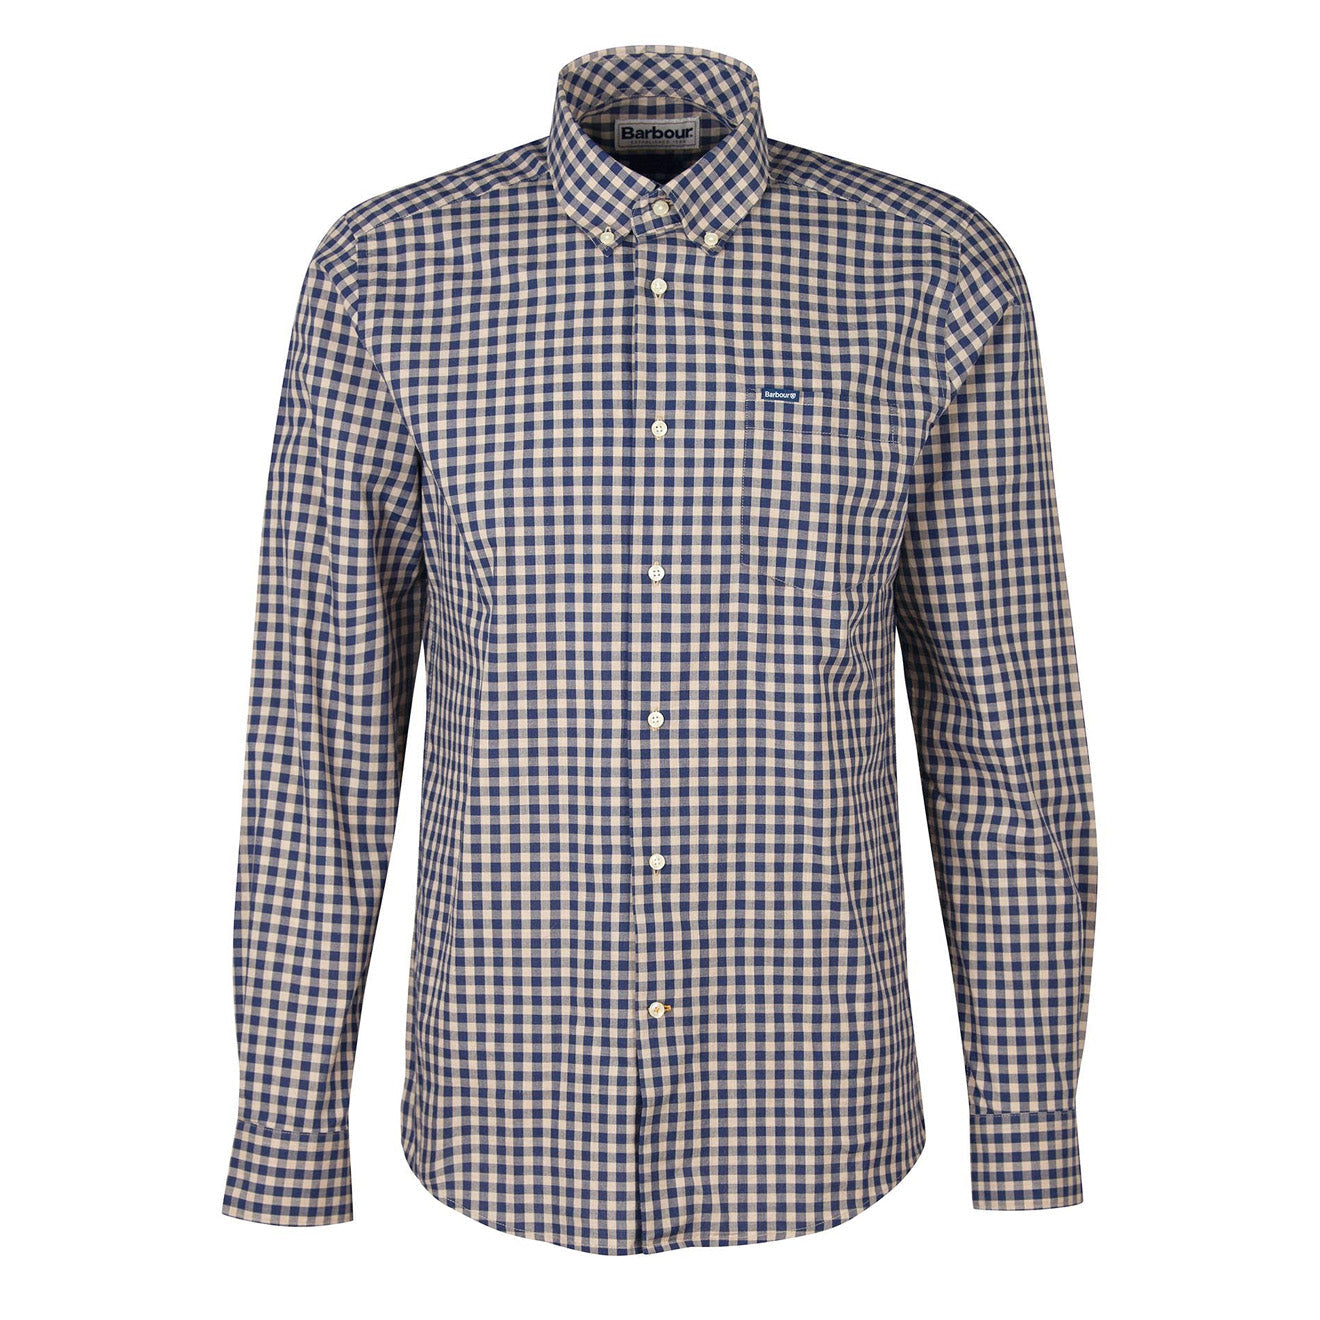 Barbour Merryton Tailored Shirt Stone | The Sporting Lodge